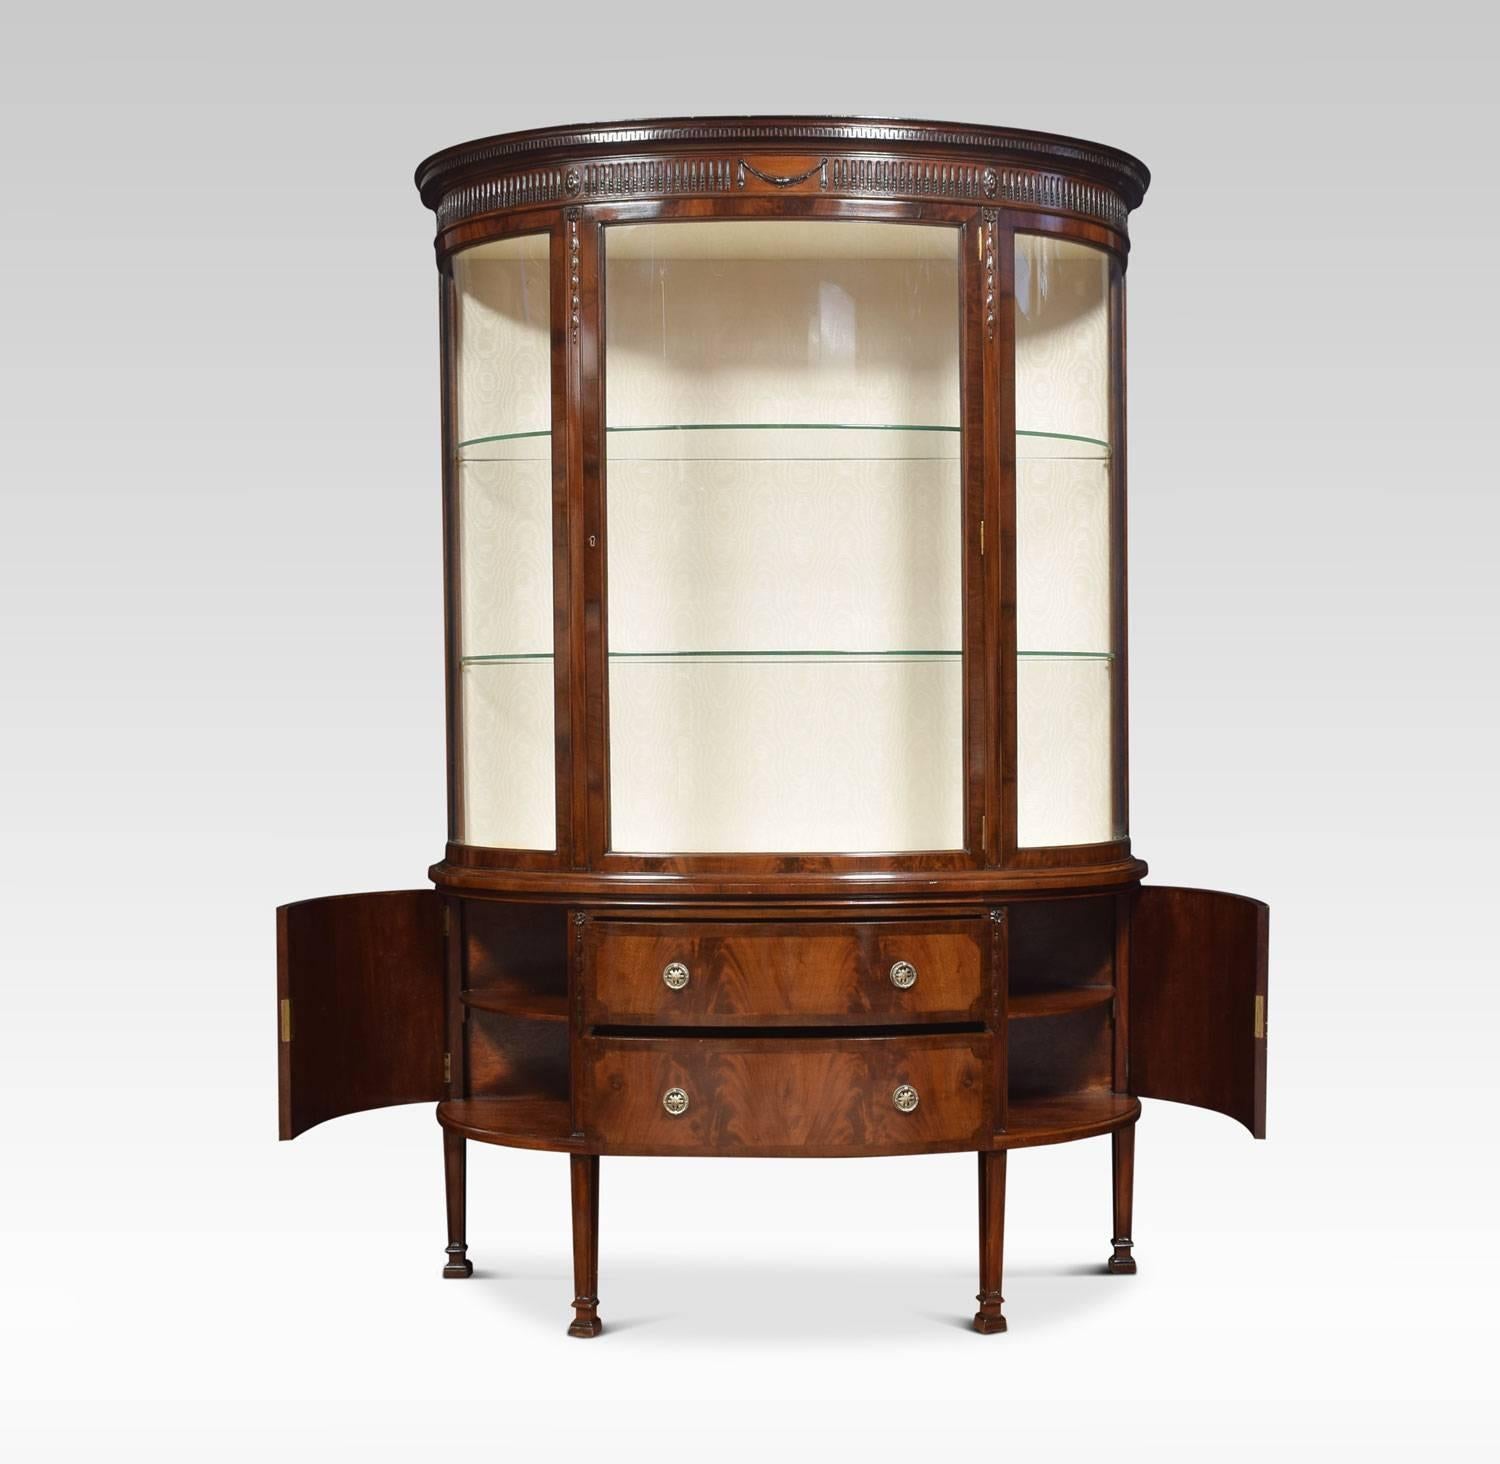 Mahogany bow fronted display cabinet the moulded cornice with central urn and floral swag carving above large central single door opening to reveal two glazed shelves and upholstered interior. The base section having two central draws with tooled